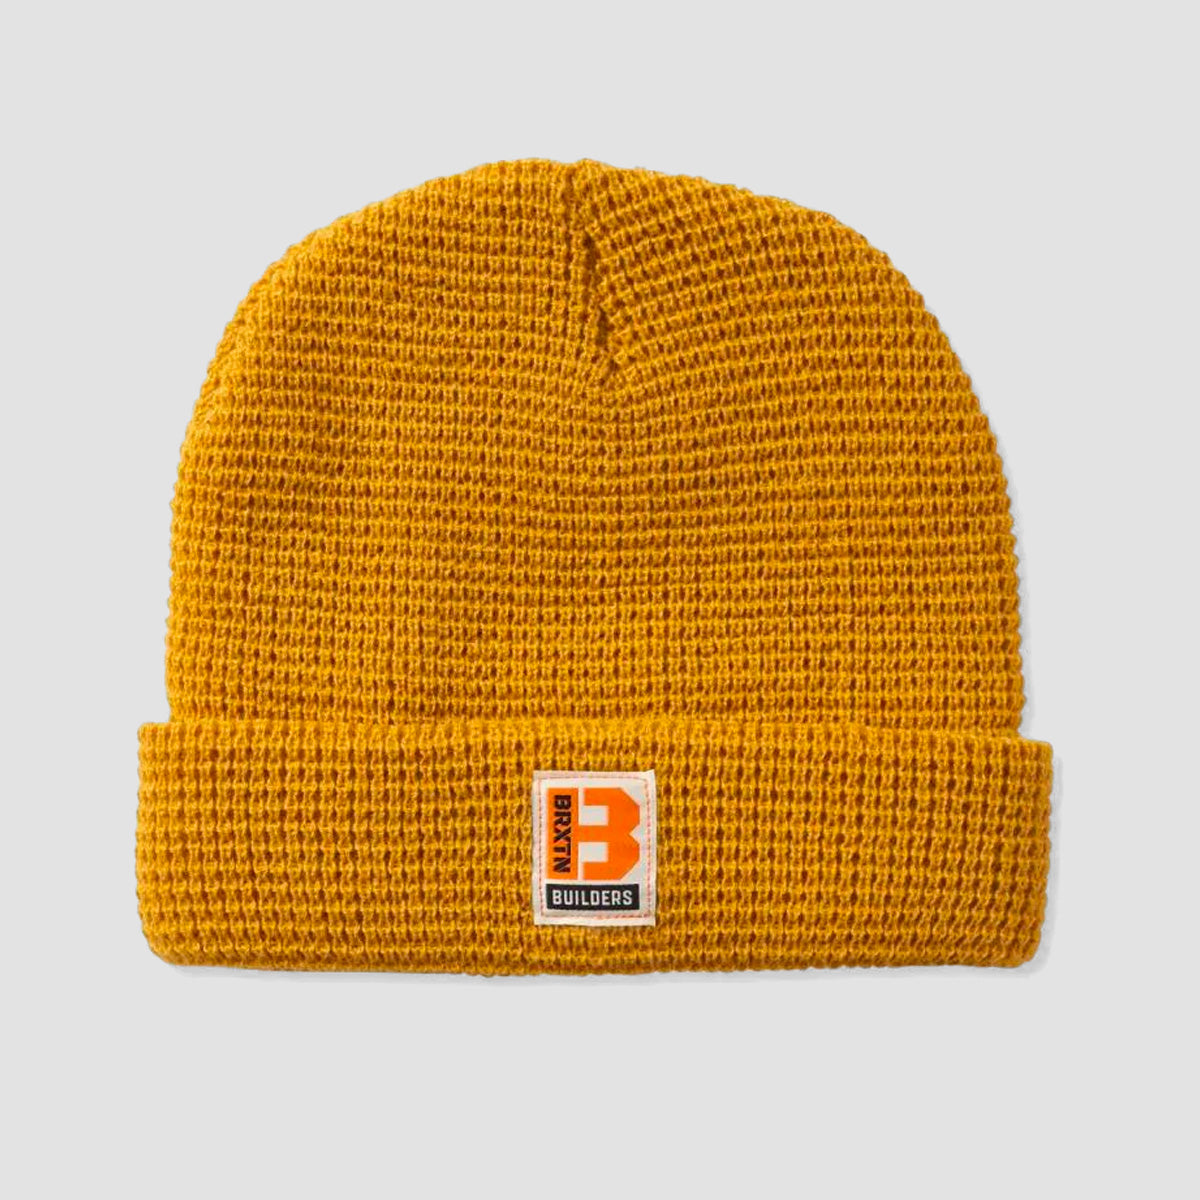 Brixton Builders Waffle Knit Beanie Bright Gold